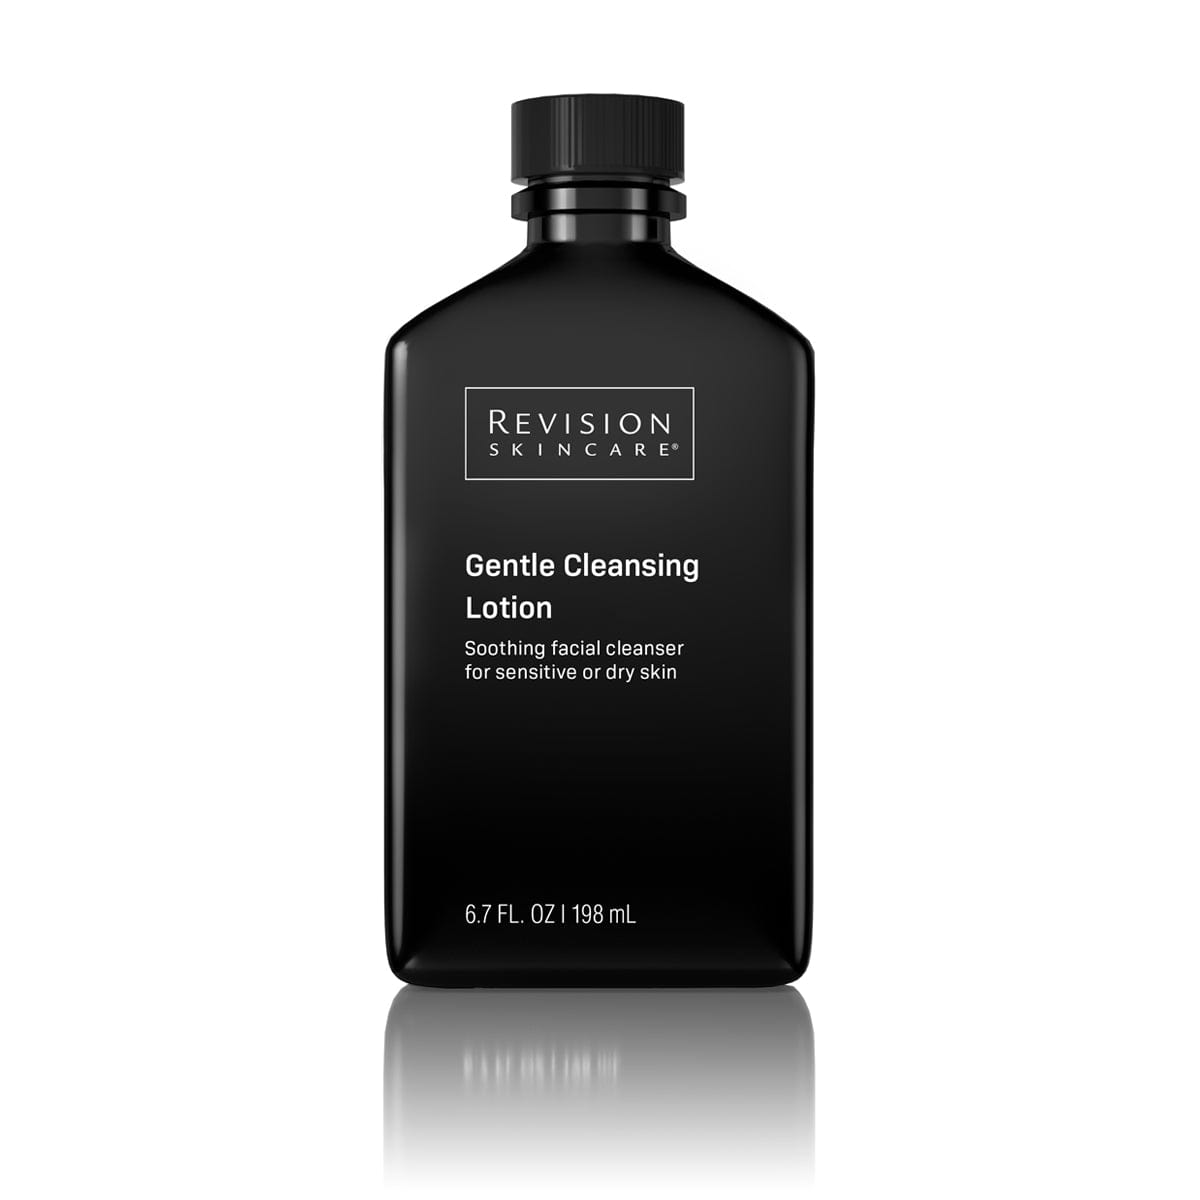 Revision Skincare Gentle Cleansing Lotion, 6.7 Fl oz